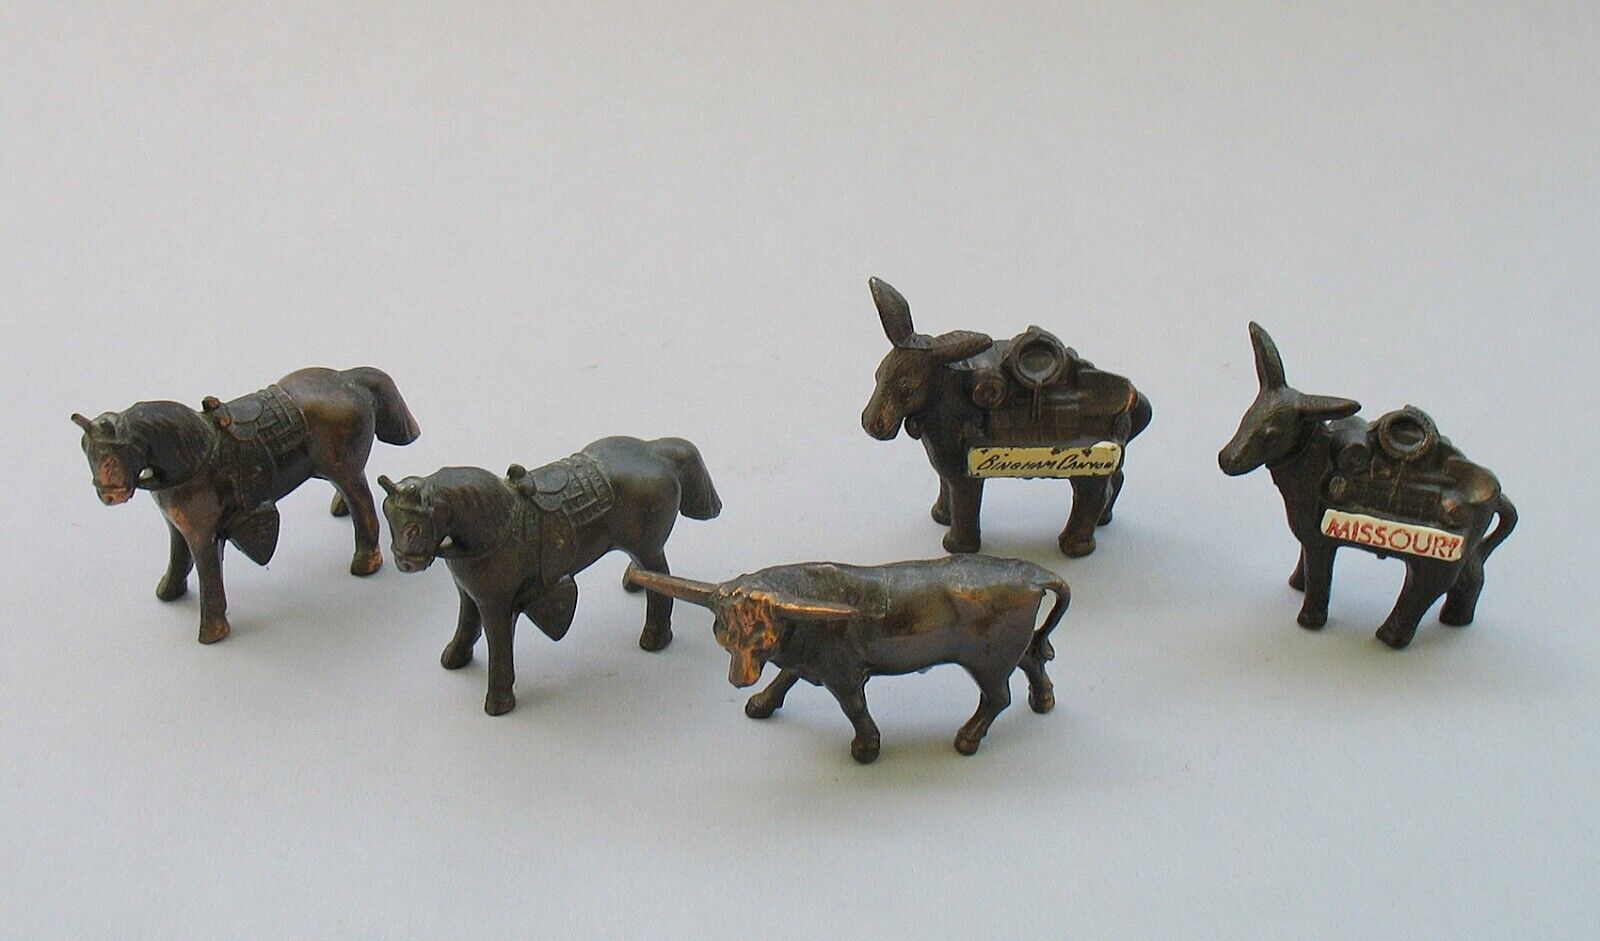 Small Brass Horse Bull Pack Mule / Donkey Figurines Vintage Lot